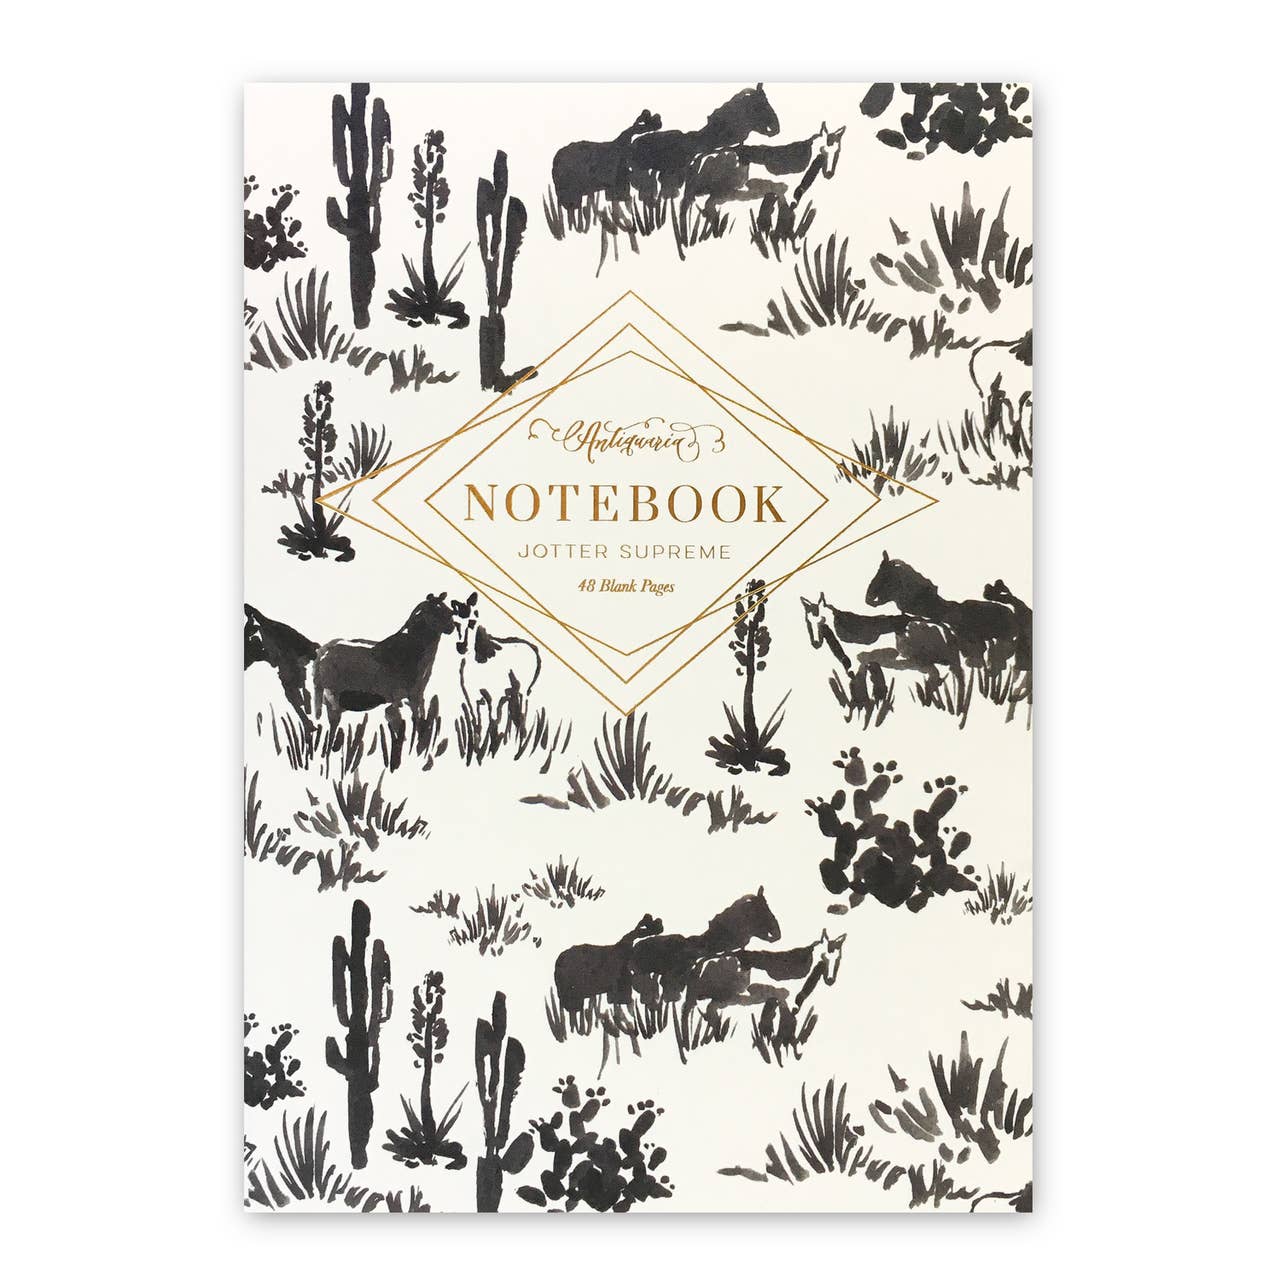 White notebook with black ink-like drawings of horse silhouettes and grass. "Notebook" text is written in gold foil. 